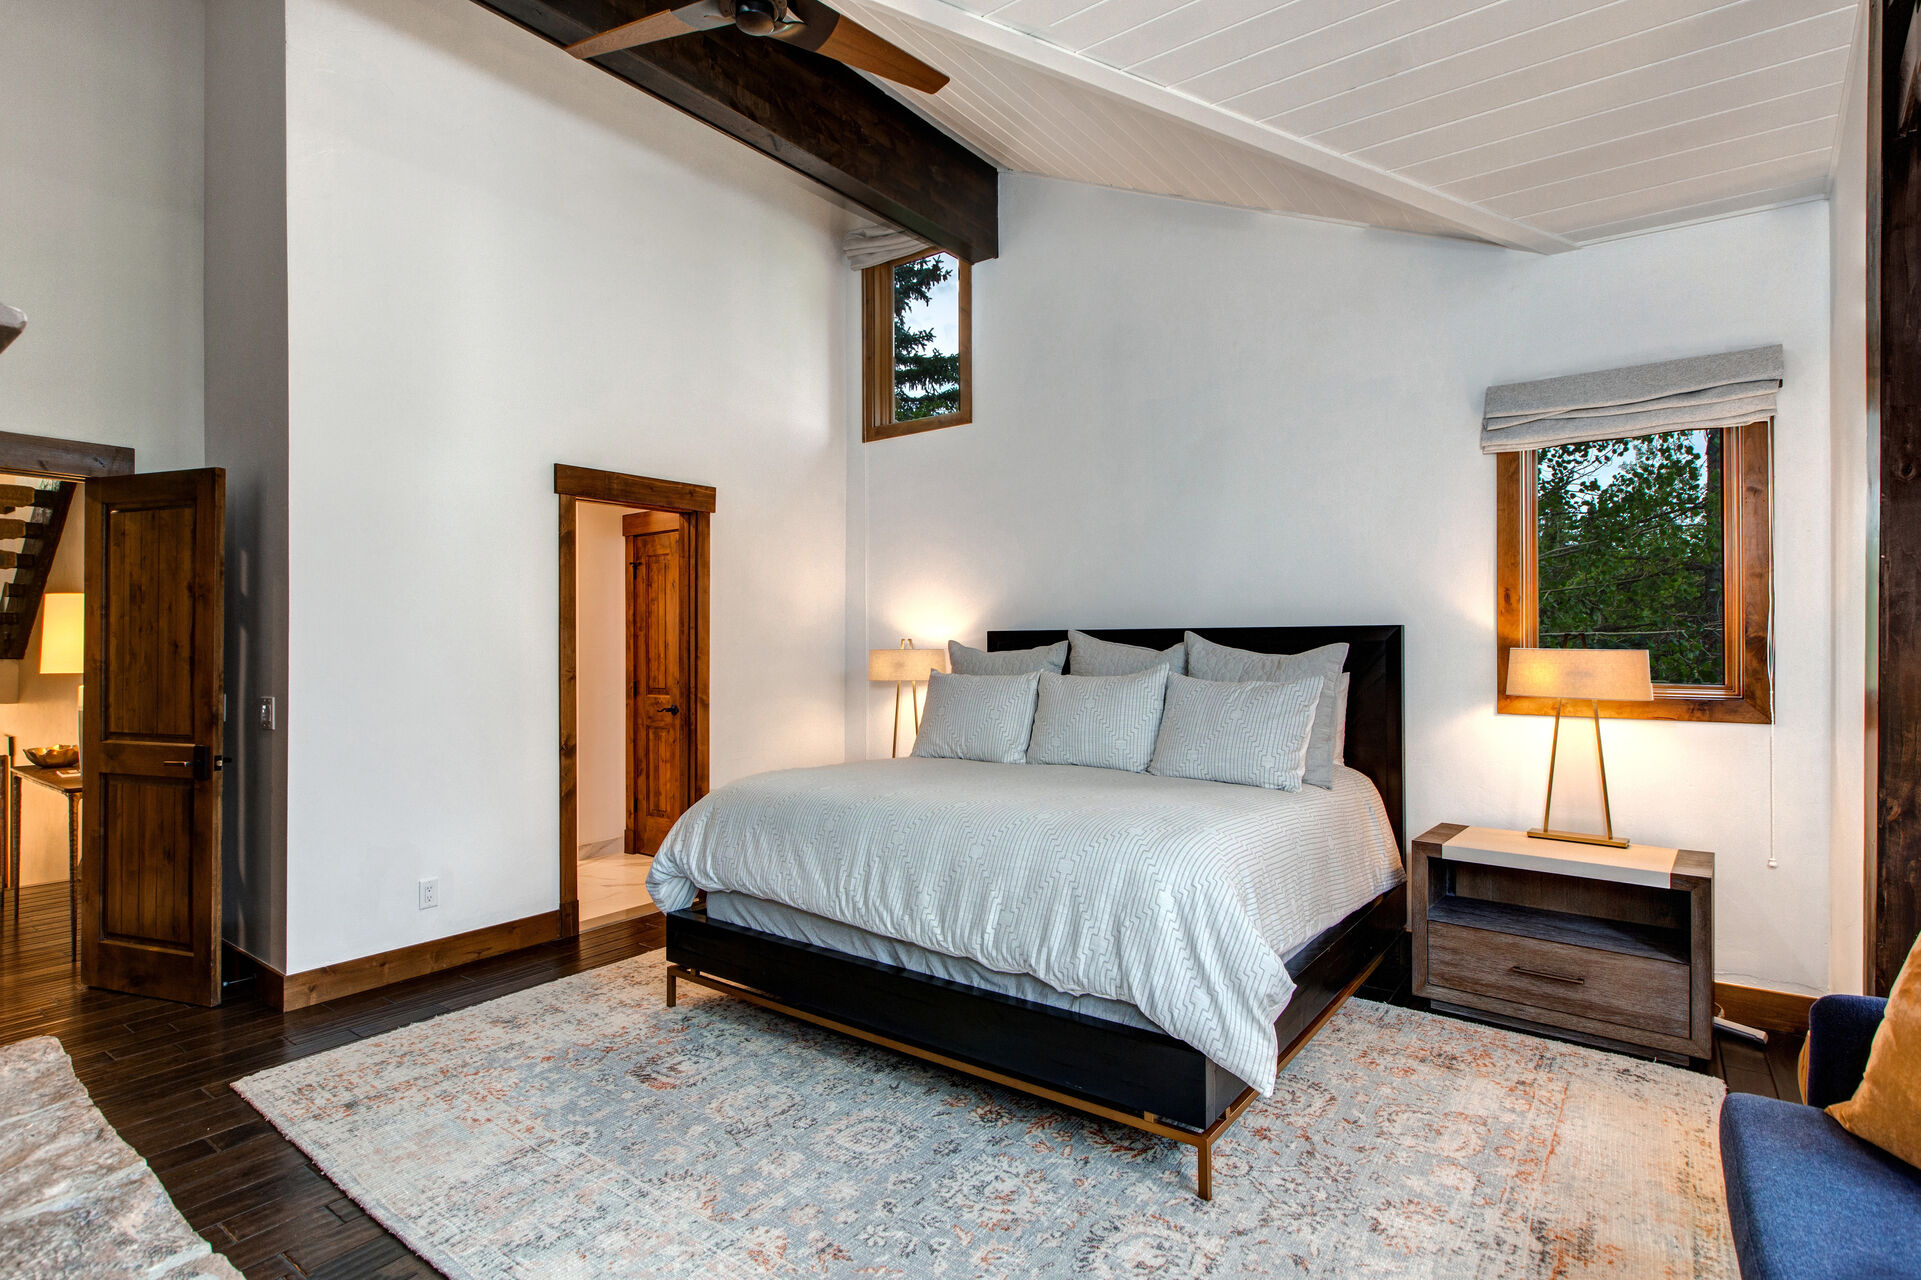 Main Level Master Bedroom with Vaulted a Ceiling and Hardwood Floors